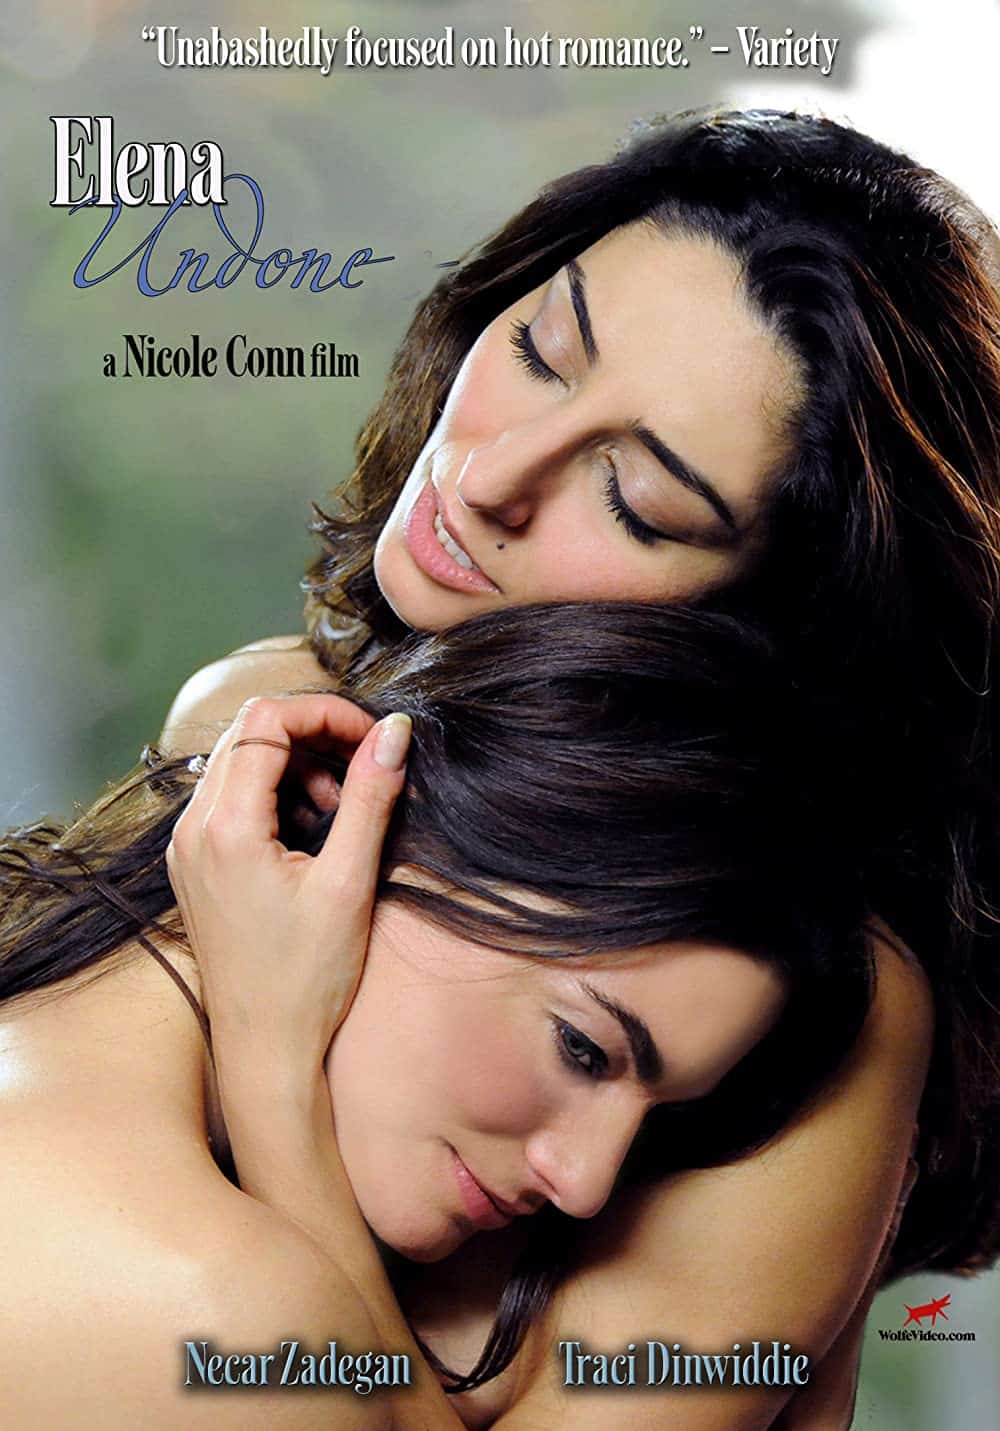 Elena Undone (2010) Best Lesbian Sex Movies to Check Out